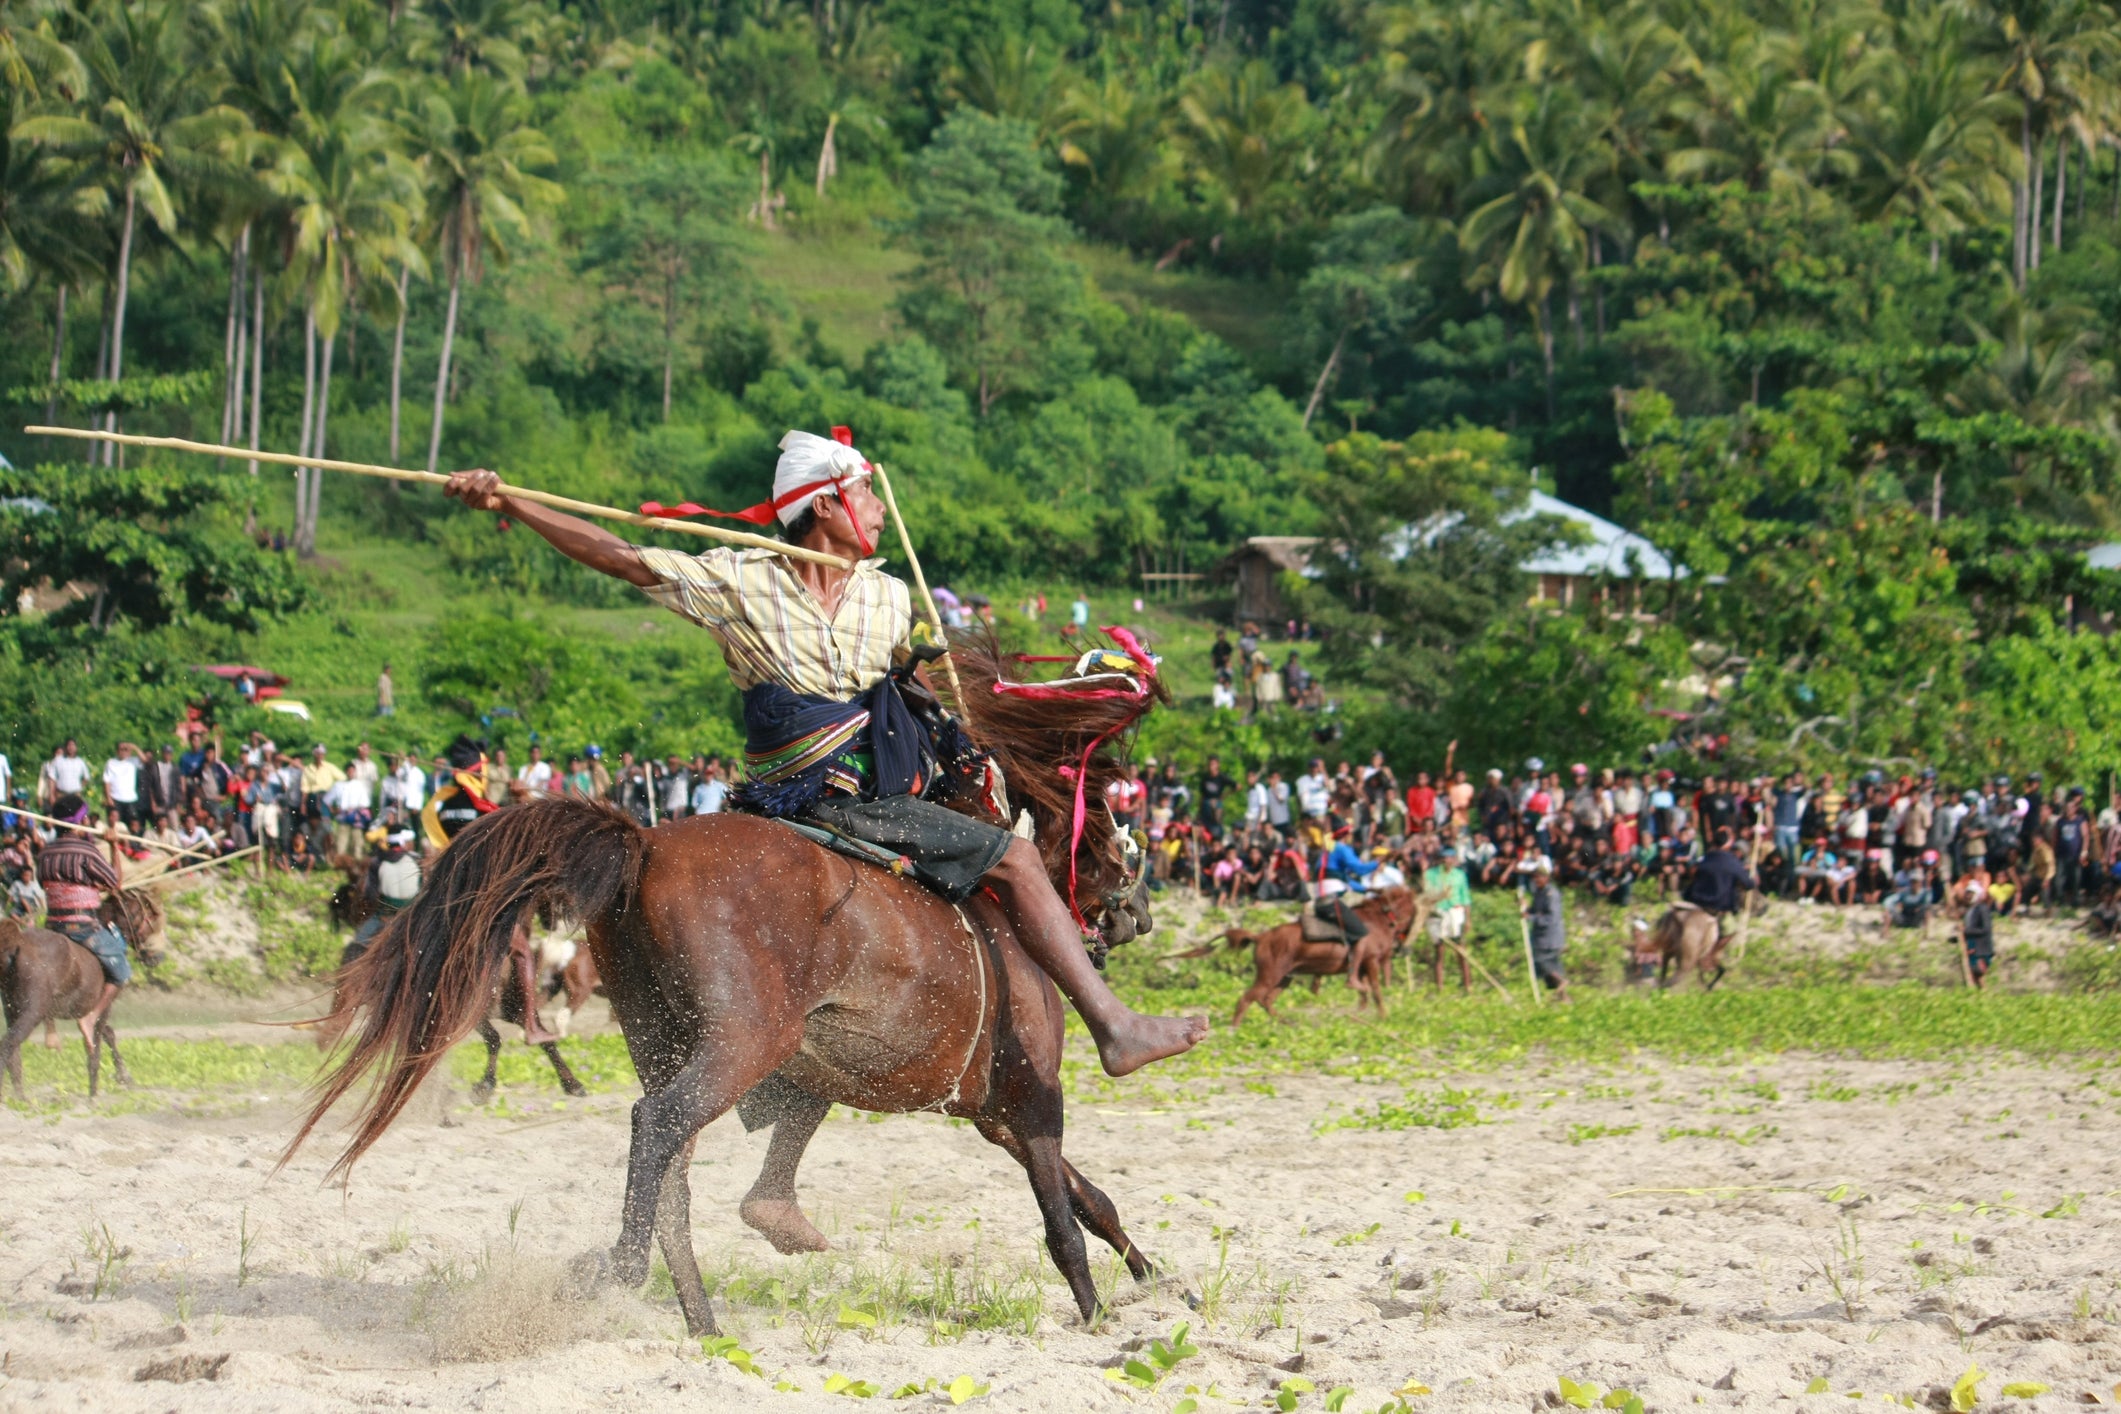 Pasola in play, a mounted spear-fighting competition from Sumba